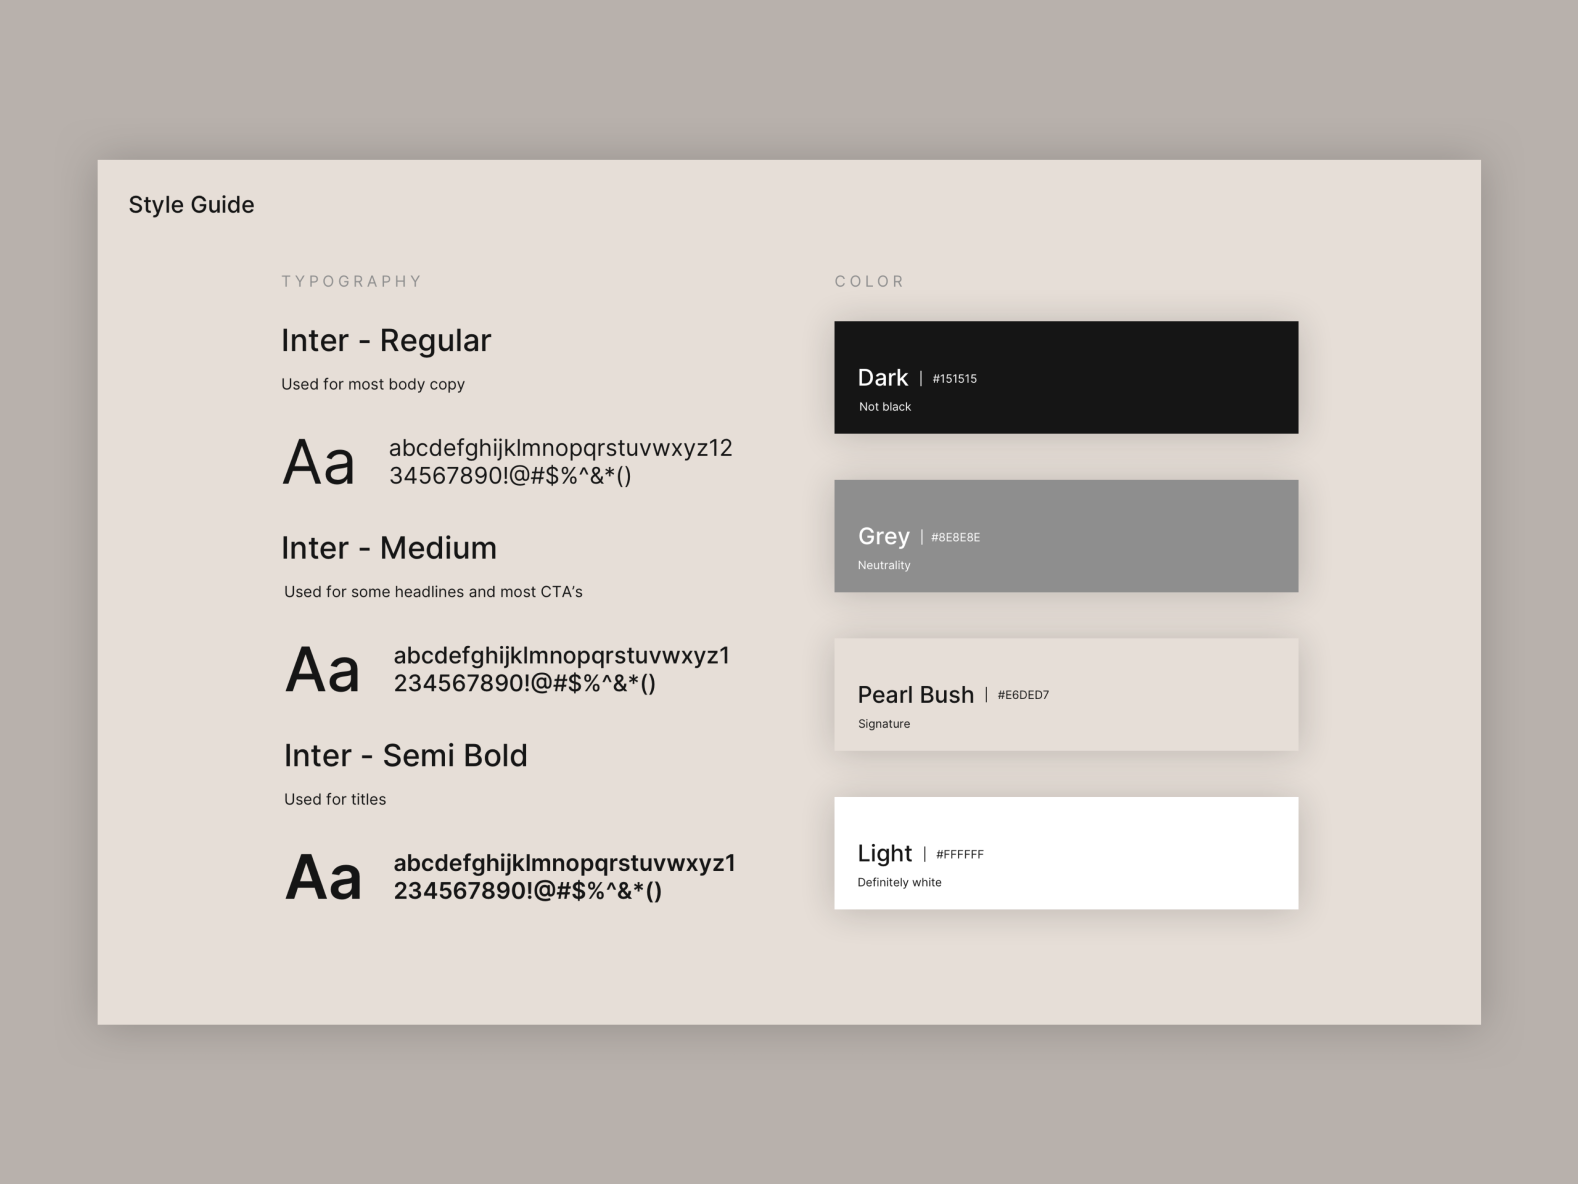 Style Guide by Benjamin Hoppe on Dribbble